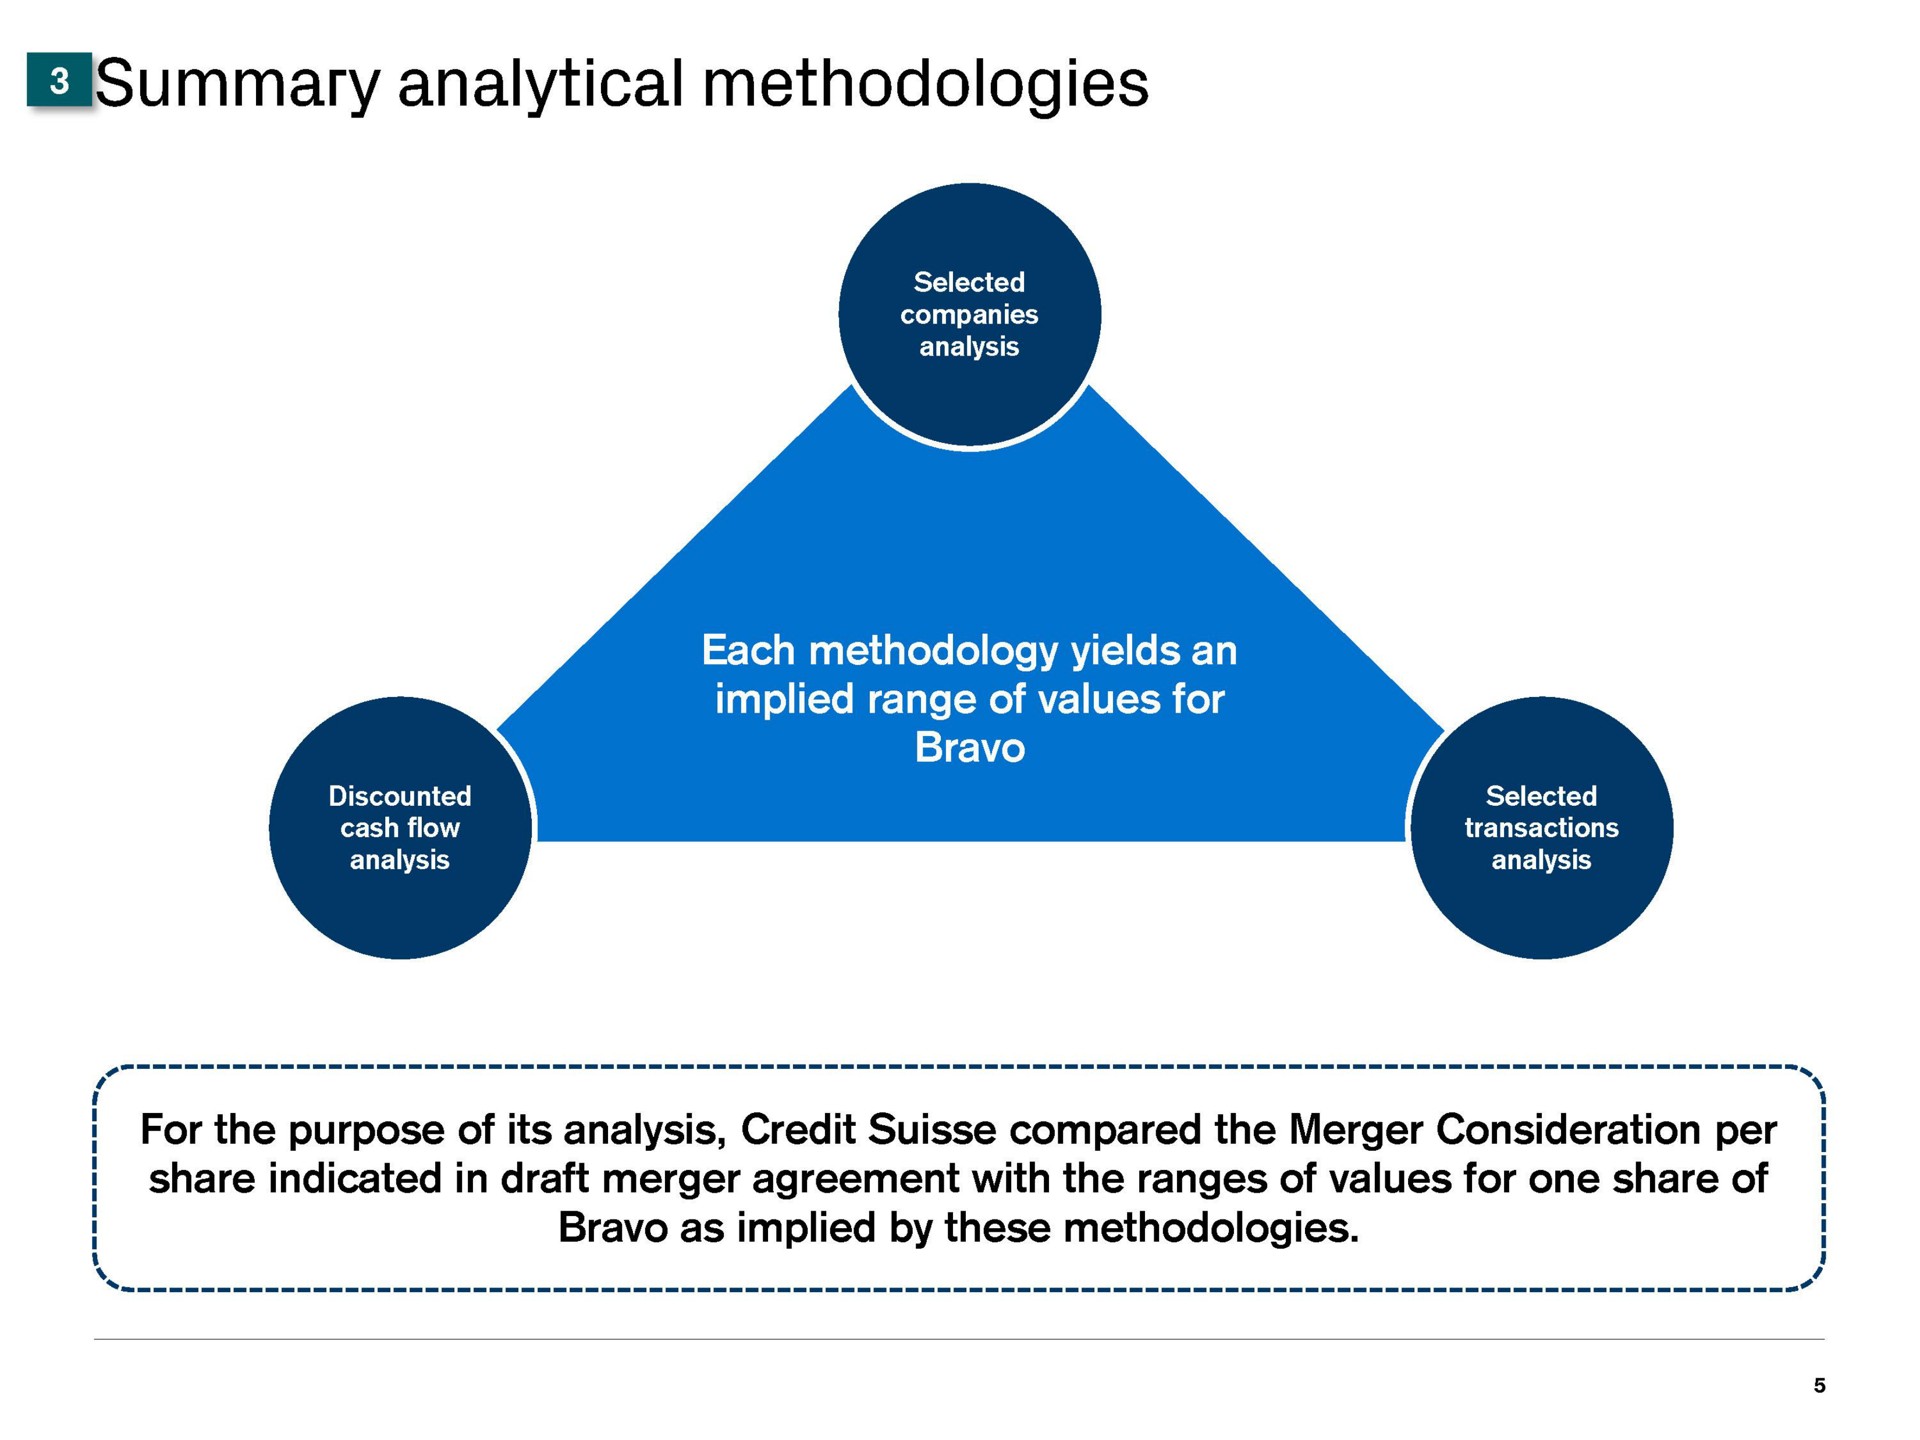 analytical methodologies each methodology yields an implied range of values for bravo for the purpose of its analysis credit compared the merger consideration per share indicated in draft merger agreement with the ranges of values for one share of bravo as implied by these methodologies | Credit Suisse